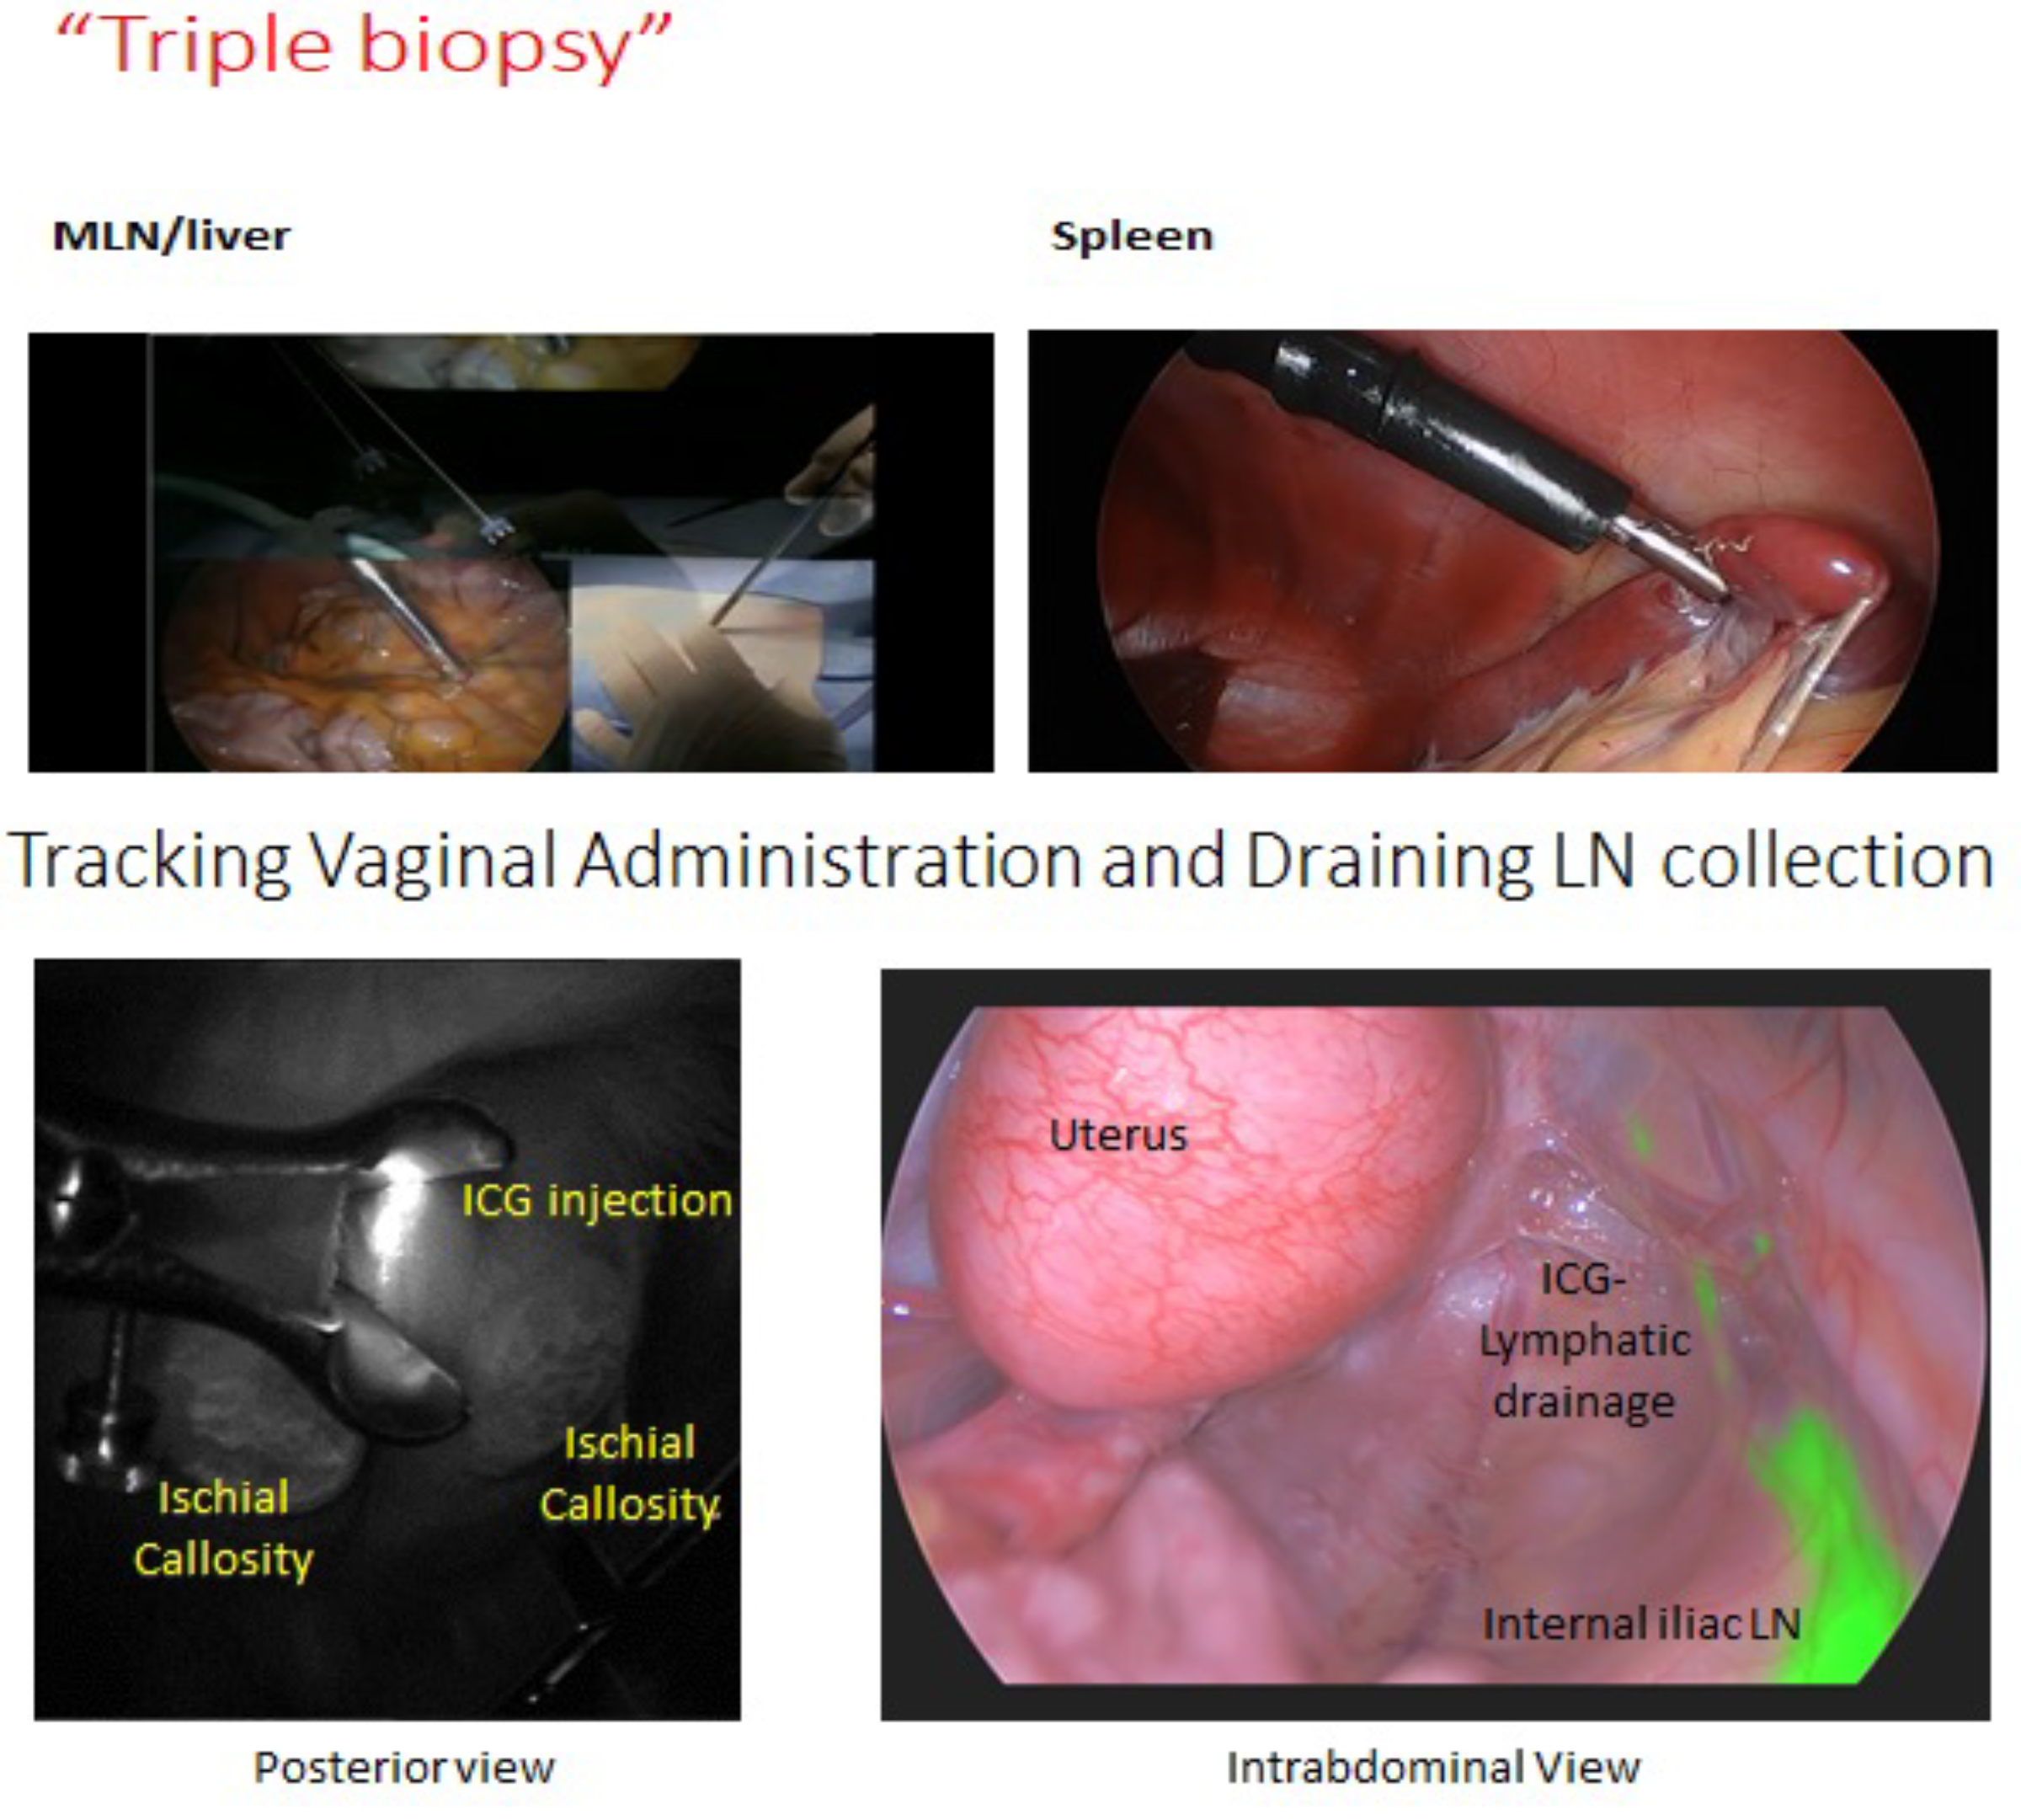 The second image represents the use of laparoscopic techniques to do minimally invasive biopsies of the spleen, mesenteric lymph nodes and liver.   The final image is the use of ICG to identify the draining lymph node after an intraepithelial injection of ICG in the vaginal mucosa. 